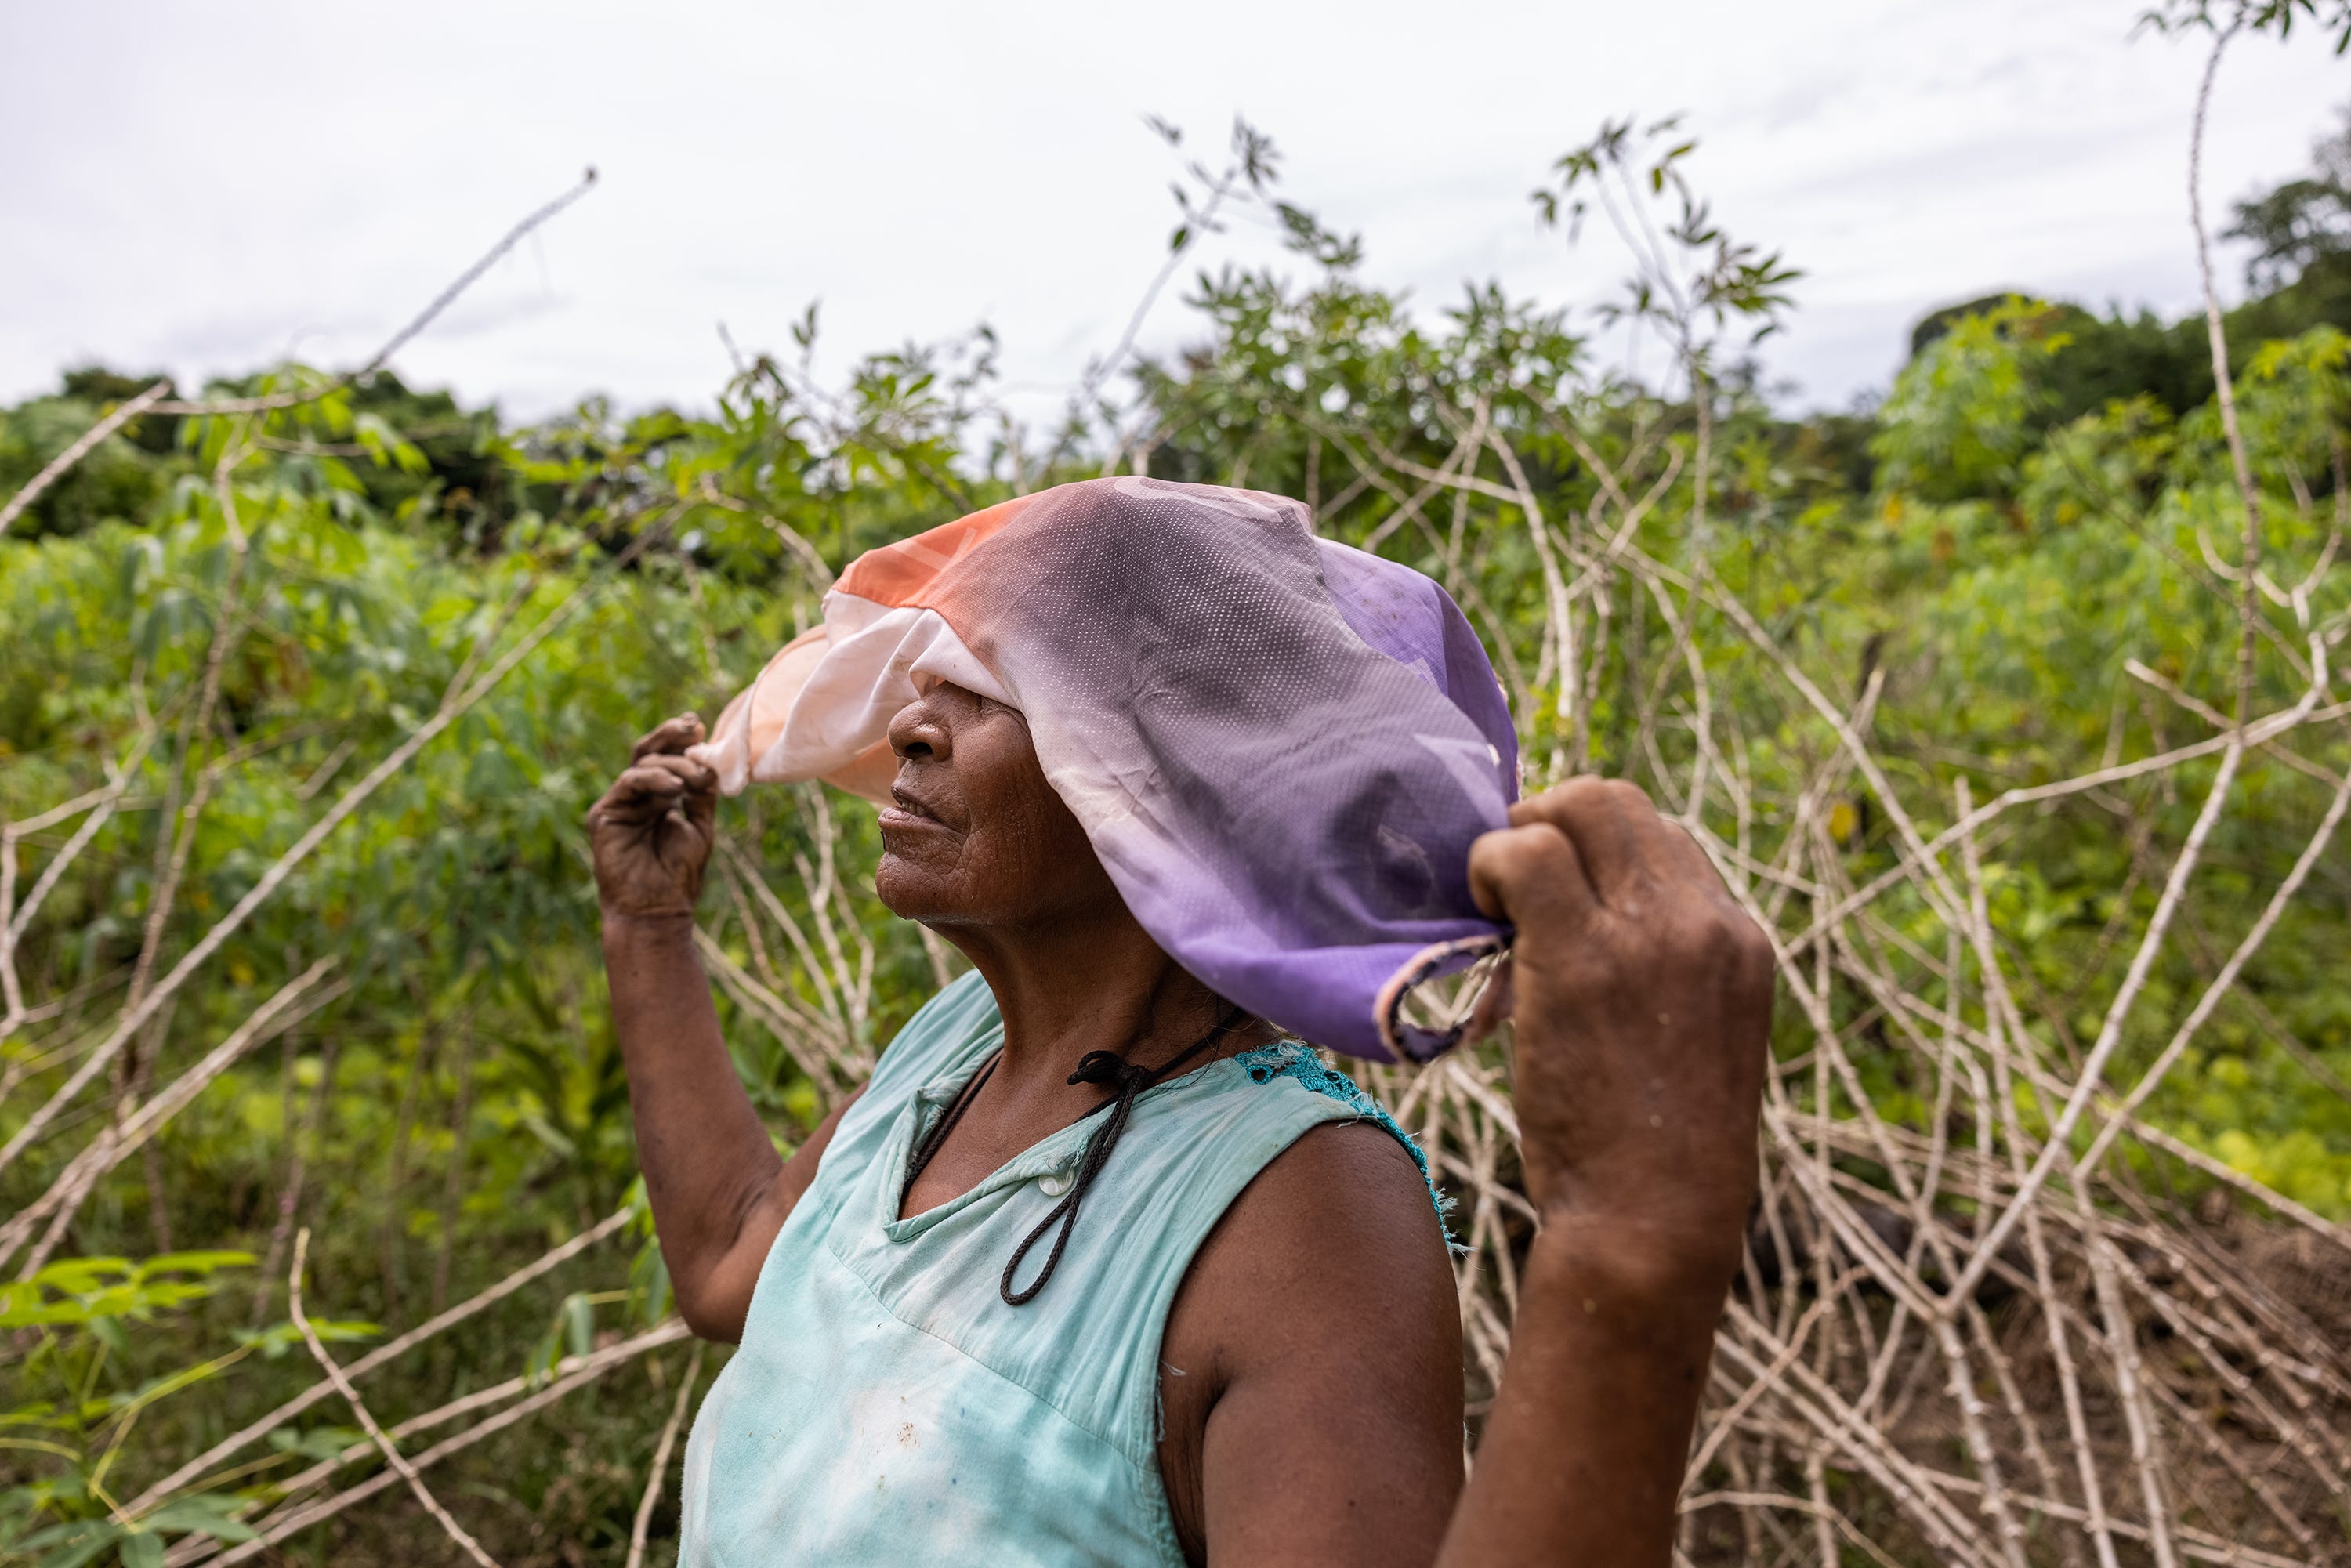 Matilde Fernando Parente prepares for a harvest day of Yuca brava under the sun. The mañoco, a product that they get from this yucca, is a staple of her Amazon community's diet.